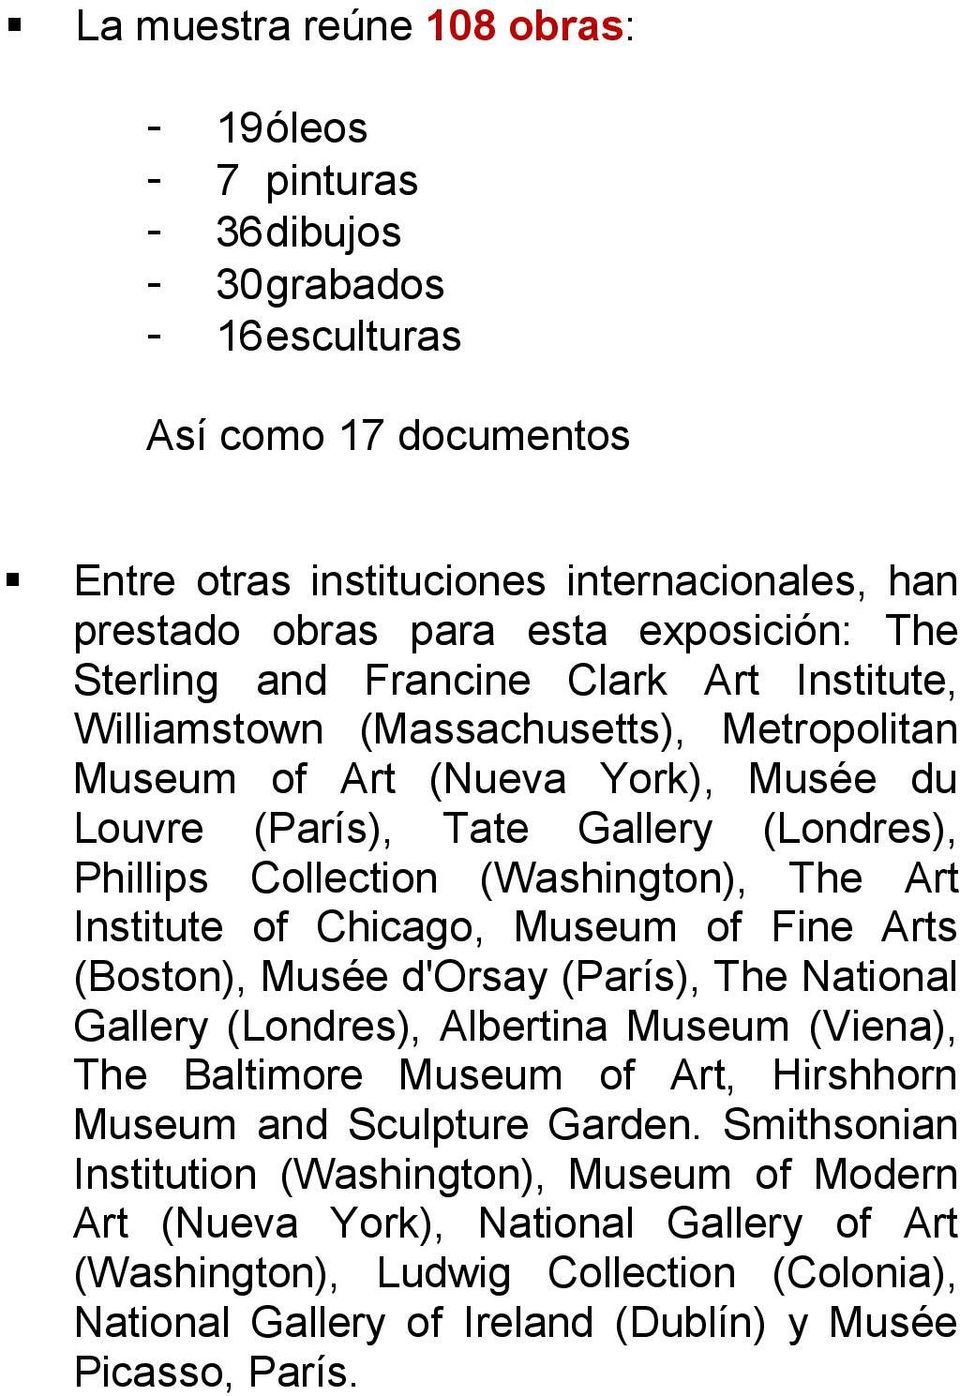 (Washington), The Art Institute of Chicago, Museum of Fine Arts (Boston), Musée d'orsay (París), The National Gallery (Londres), Albertina Museum (Viena), The Baltimore Museum of Art, Hirshhorn